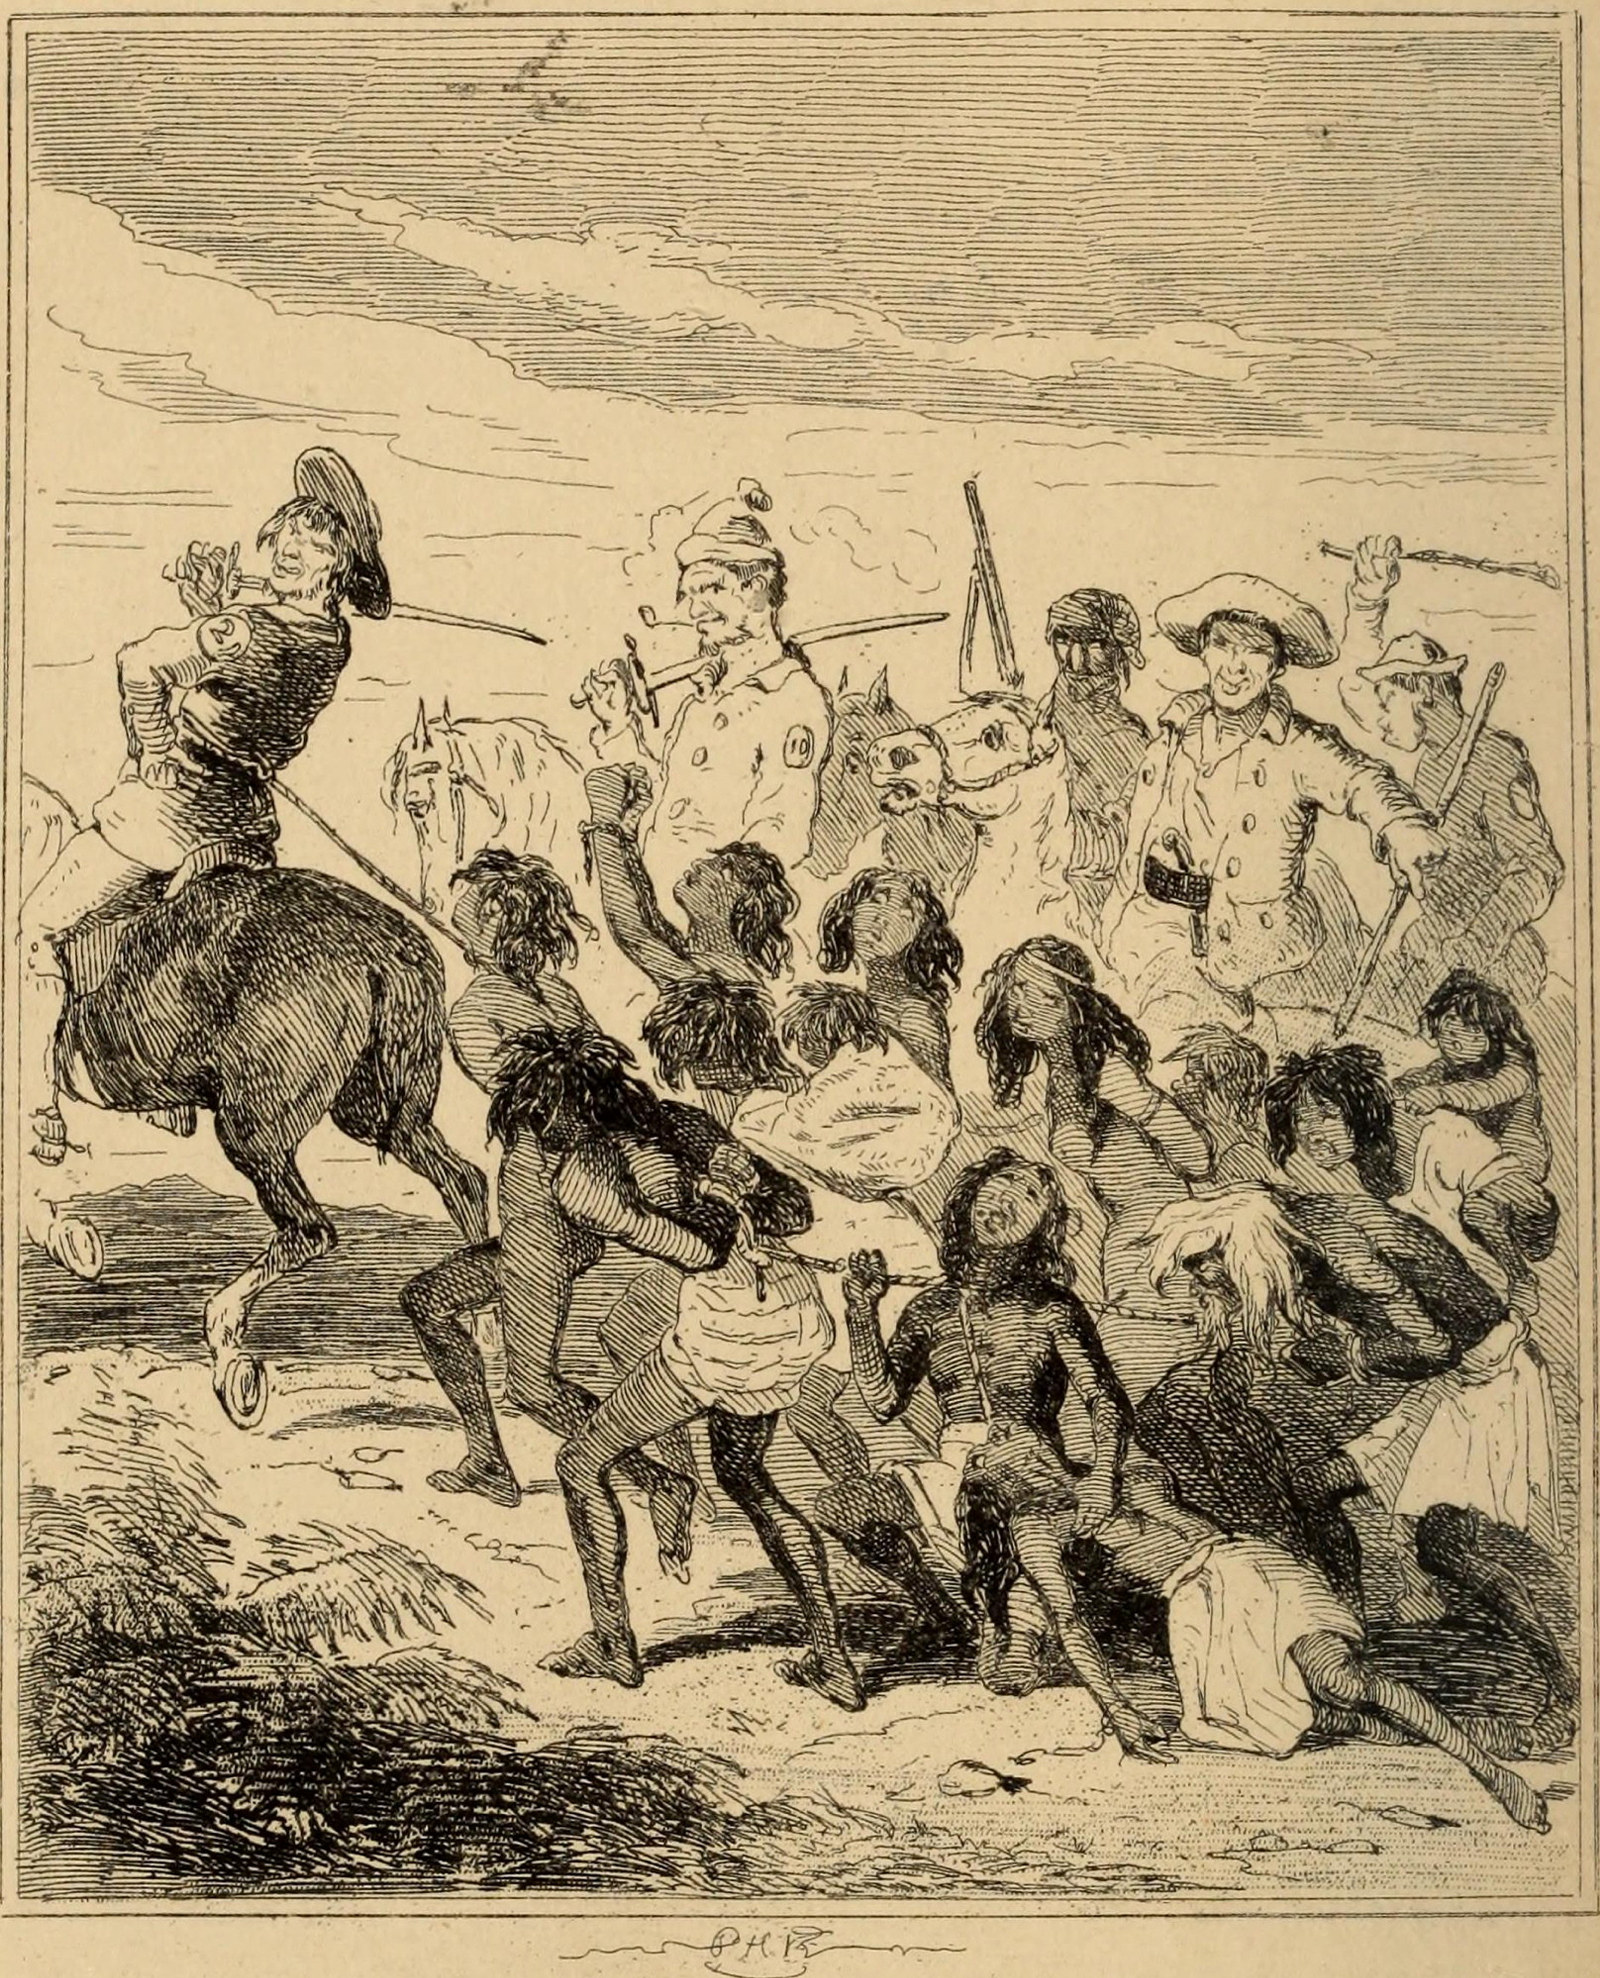 Illustration from book of a group of Aboriginal people being rounded up by white men on horseback.